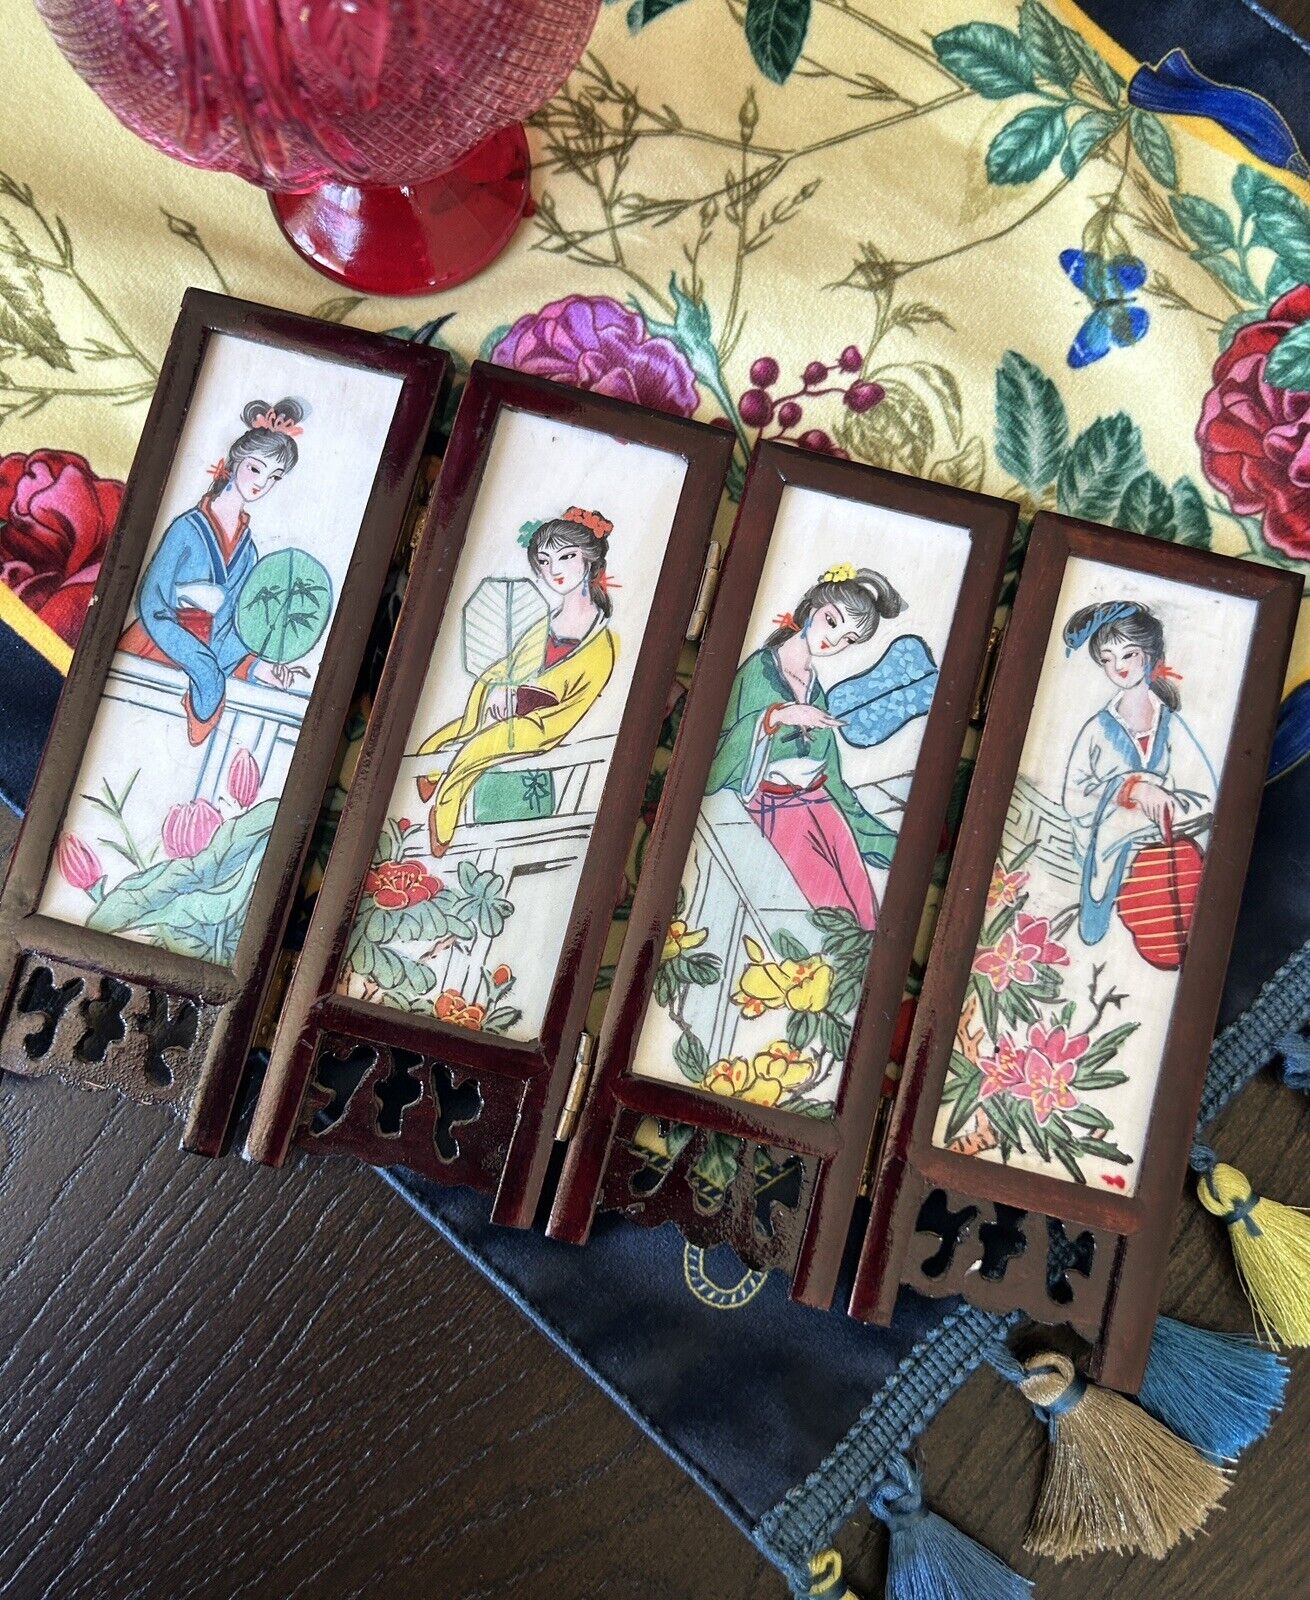 Vintage Chinese Ceramic Tile And Wood 2 Sided Folding Screen Birds & Geishas